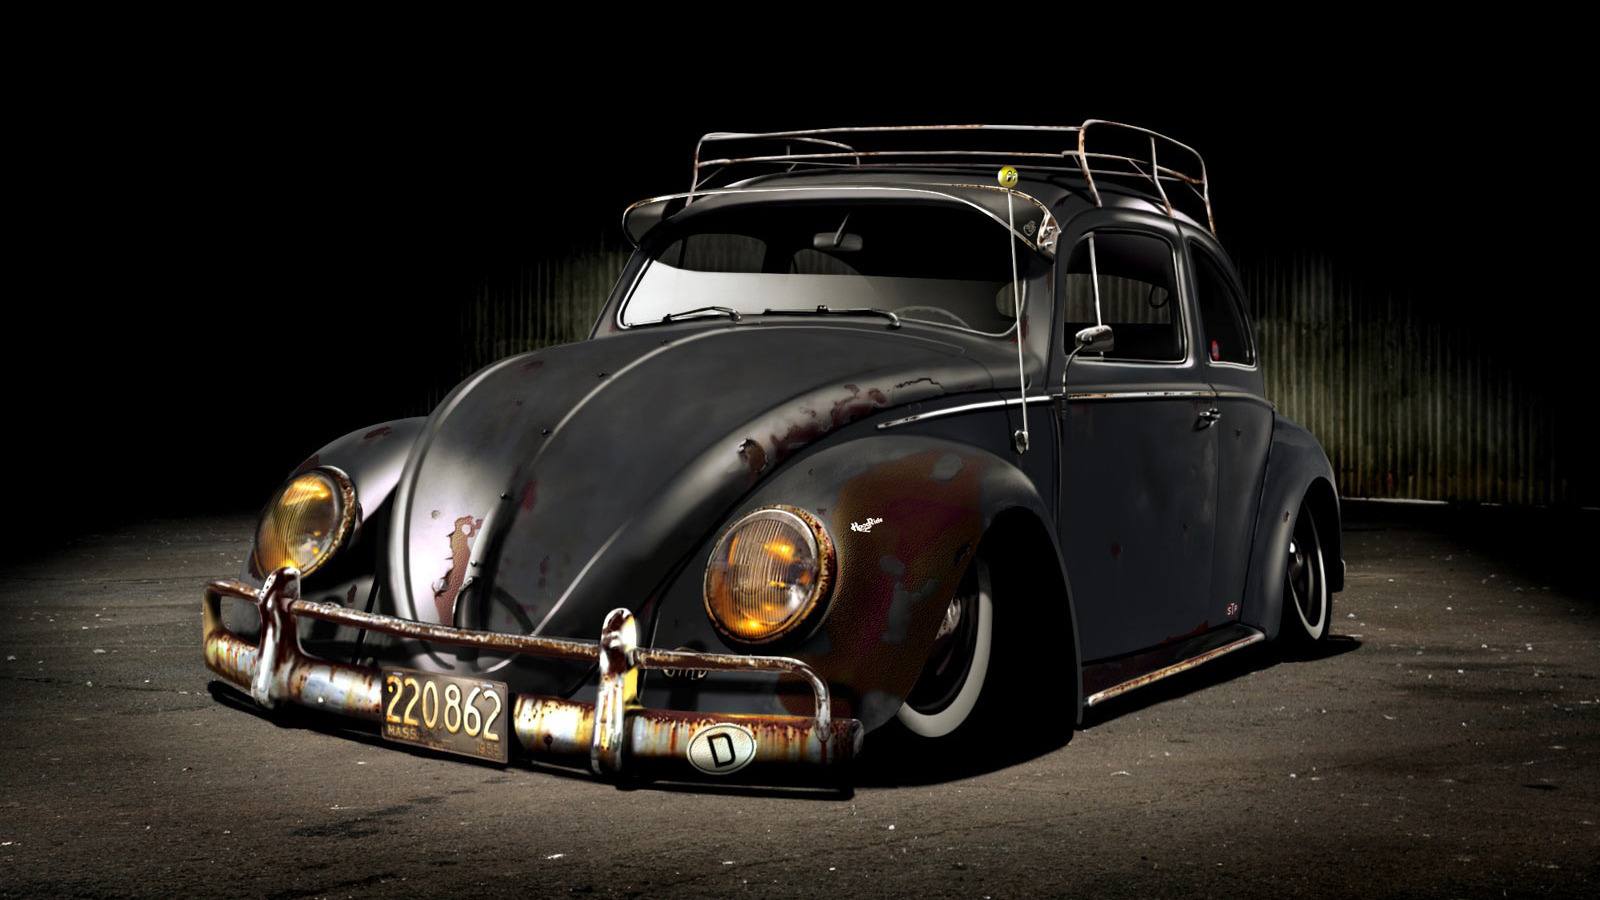  Desktop Wallpaper on Old Cars Bug Vehicles Rat Rod Car Beatle Hd Wallpaper   Insects   Bugs